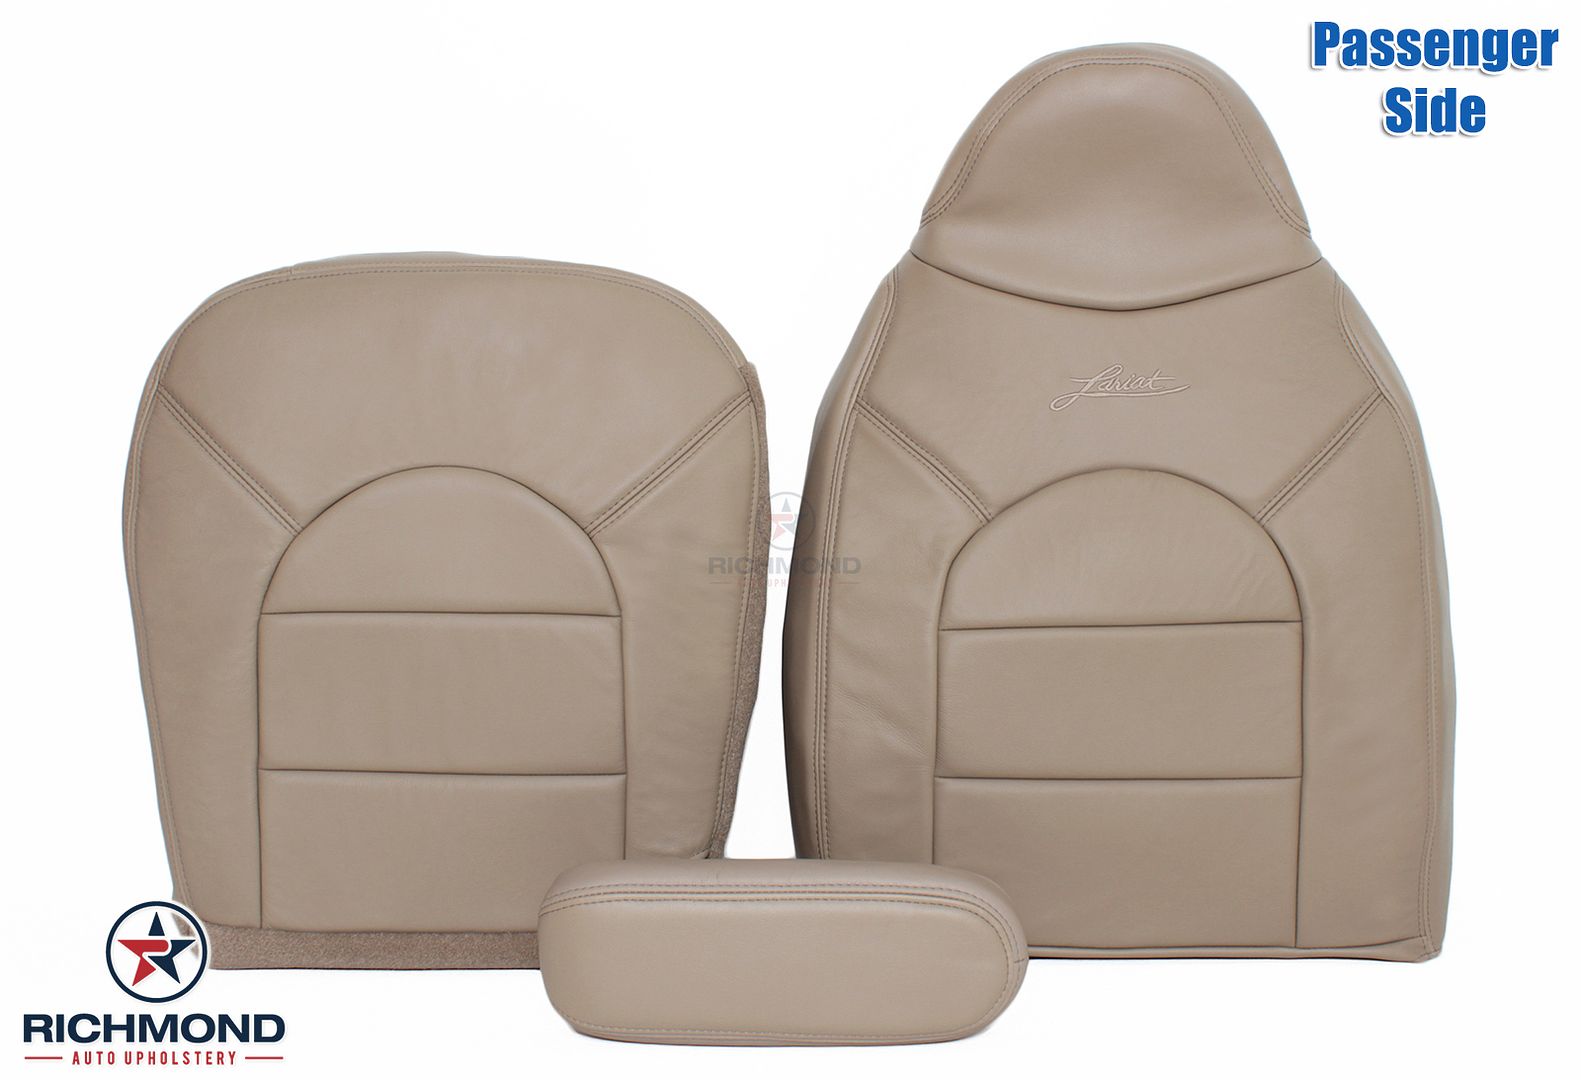 2001 Ford F250 F350 F450 550 Lariat PASSENGER Bottom-Lean Back Leather Cover Tan